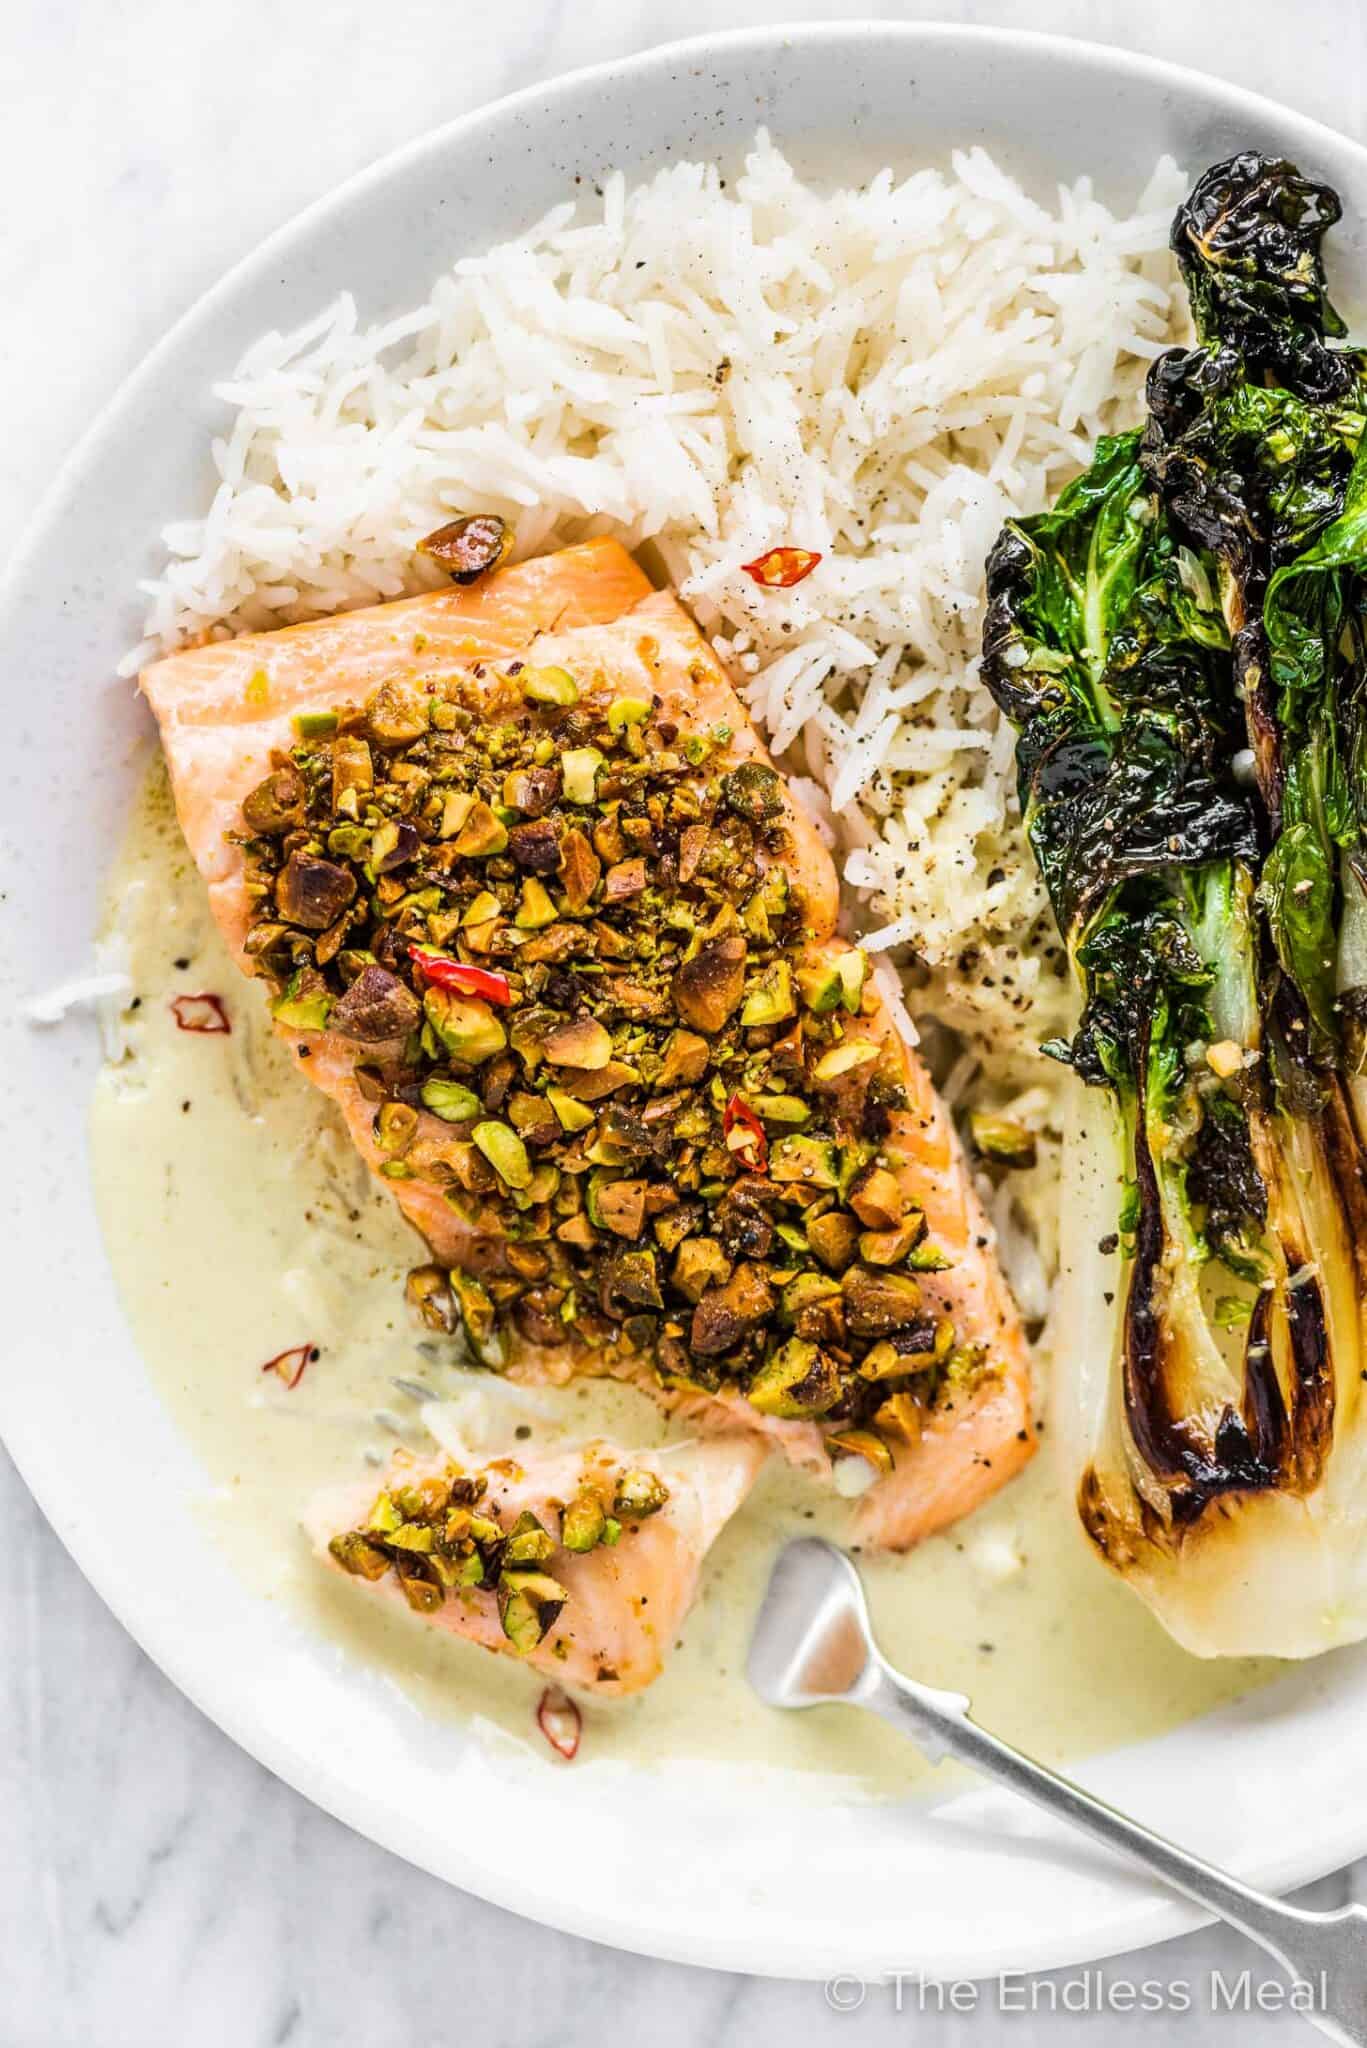 Pistachio crusted salmon on a plate with rice and bok choy.